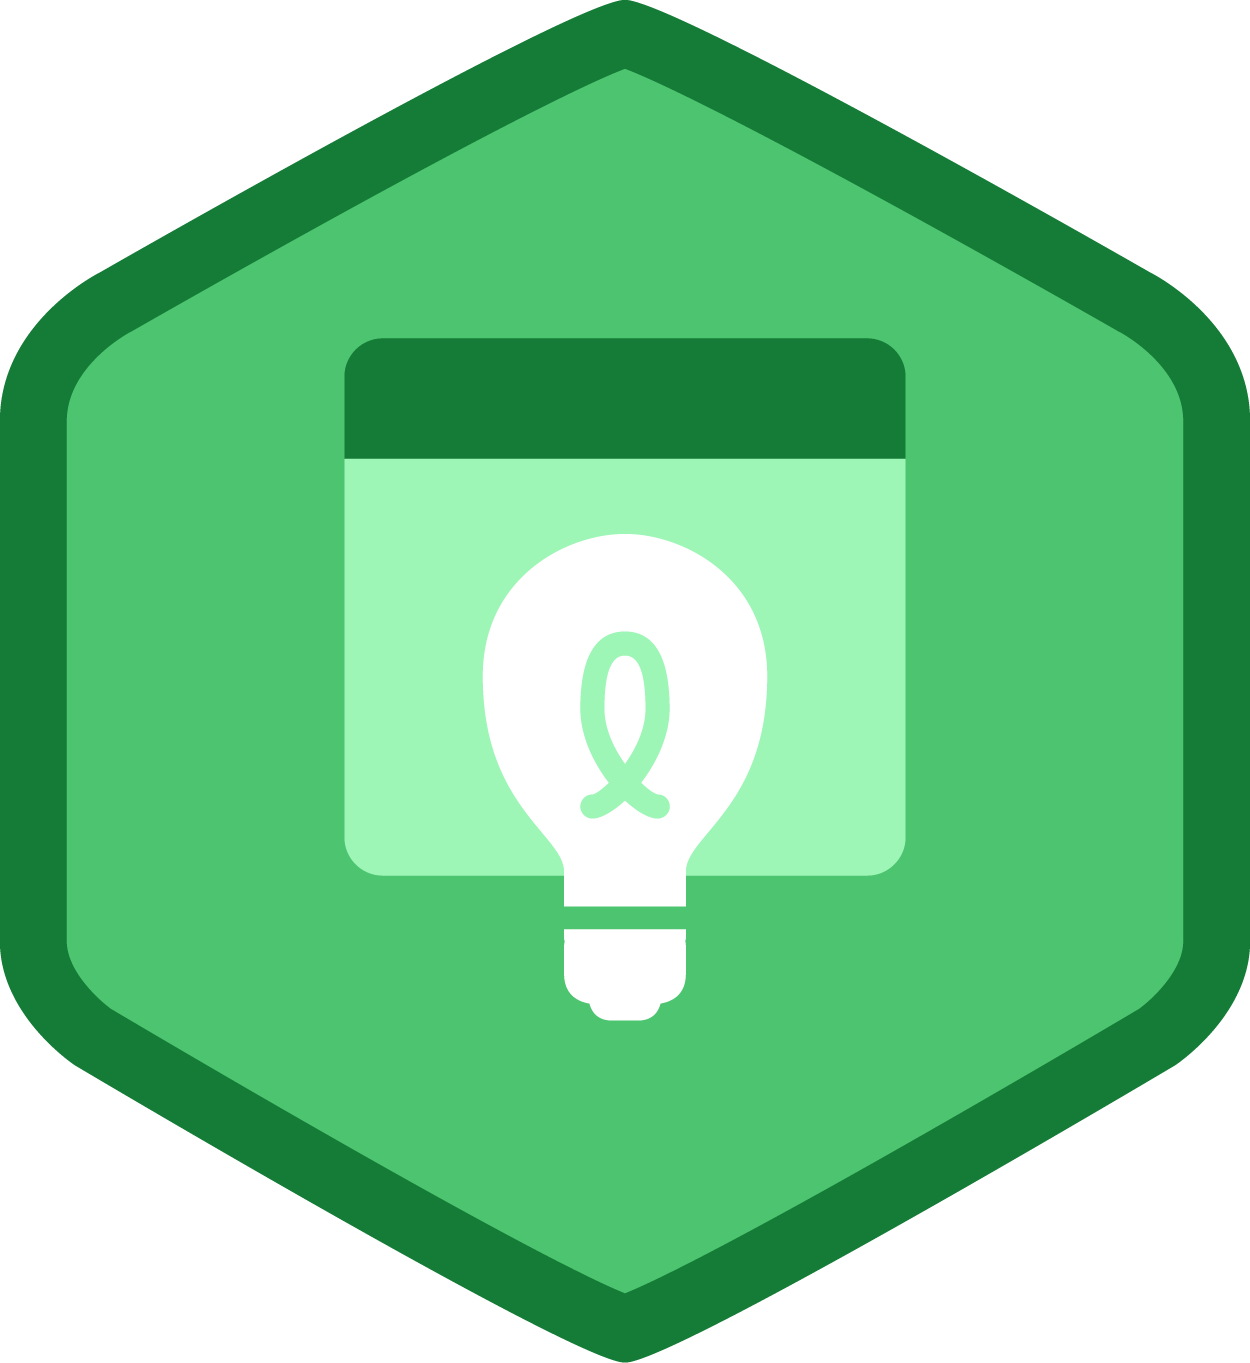 Responsive Theory - Teamtreehouse Badges (1250x1363)